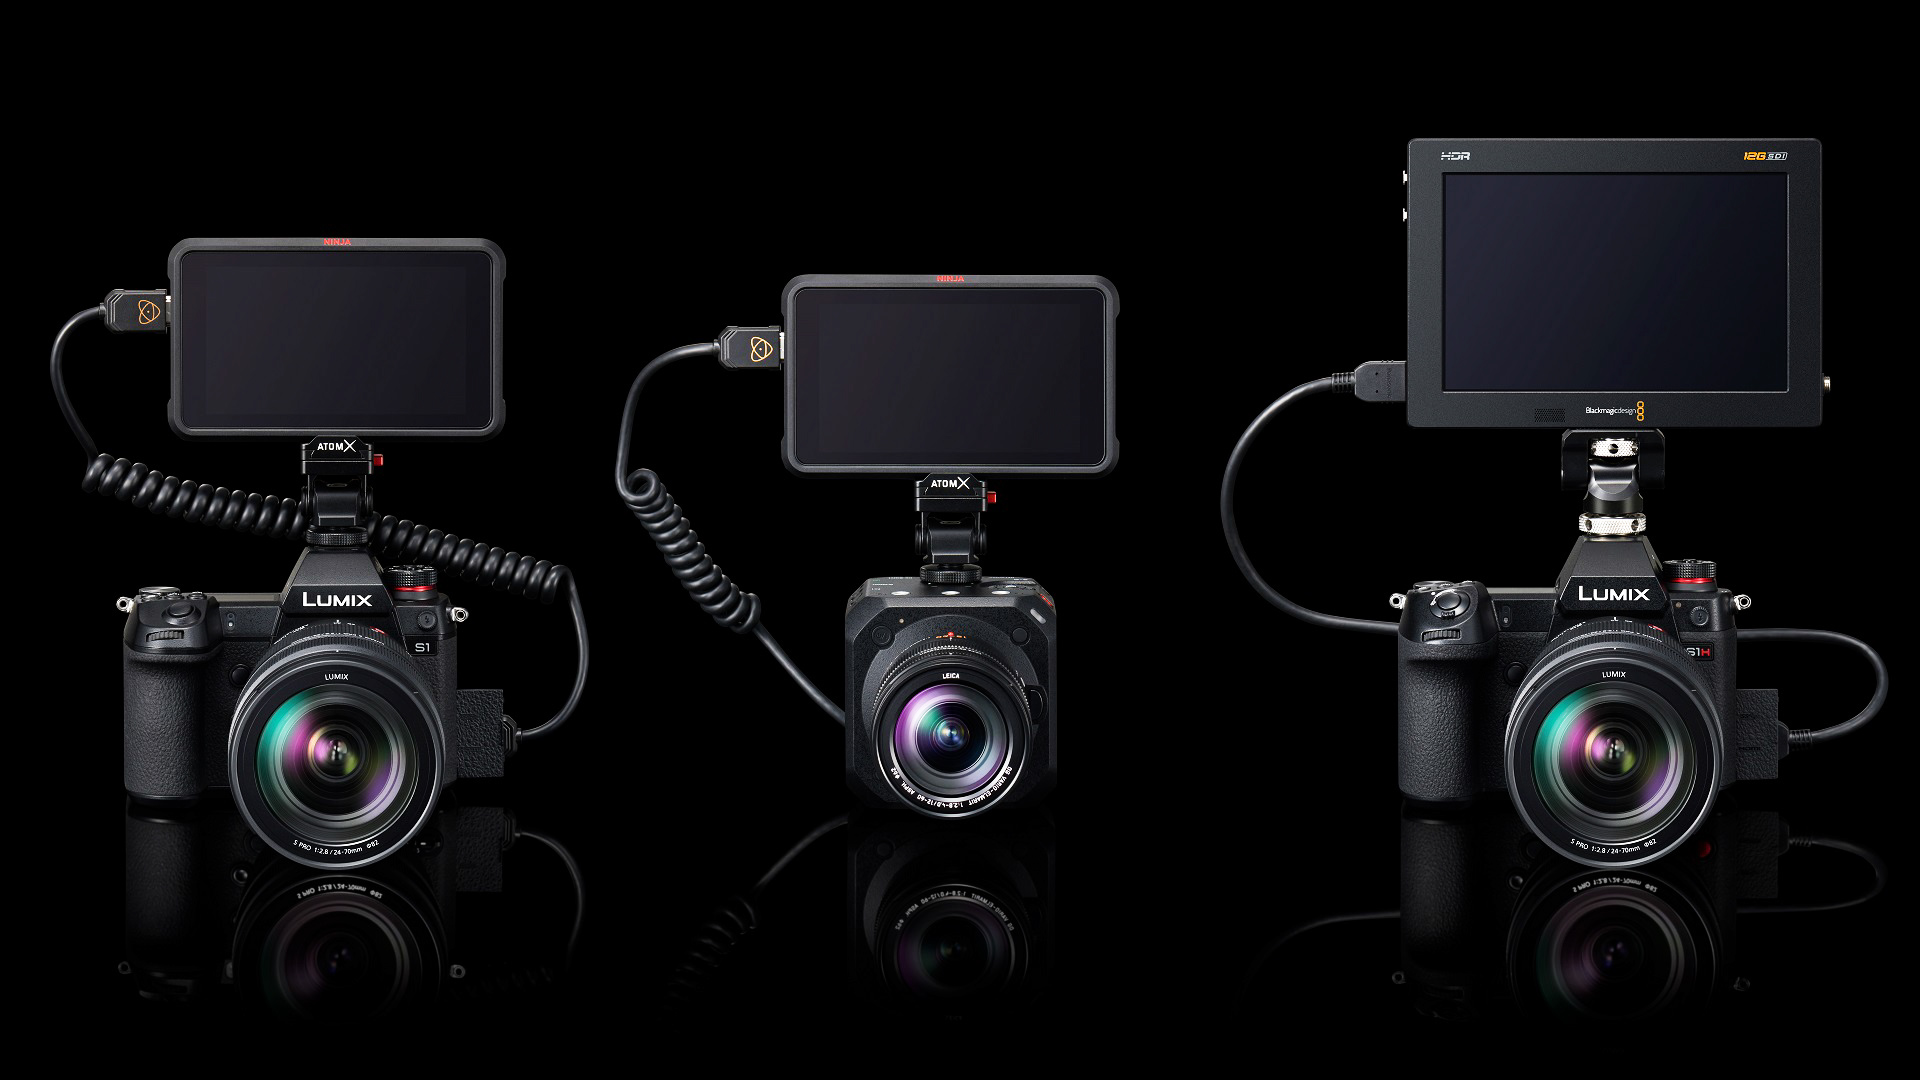 raket Bergbeklimmer Baffle Panasonic Announces Significant Firmware Updates for their LUMIX S1, S1H  and BGH1 Cameras | CineD